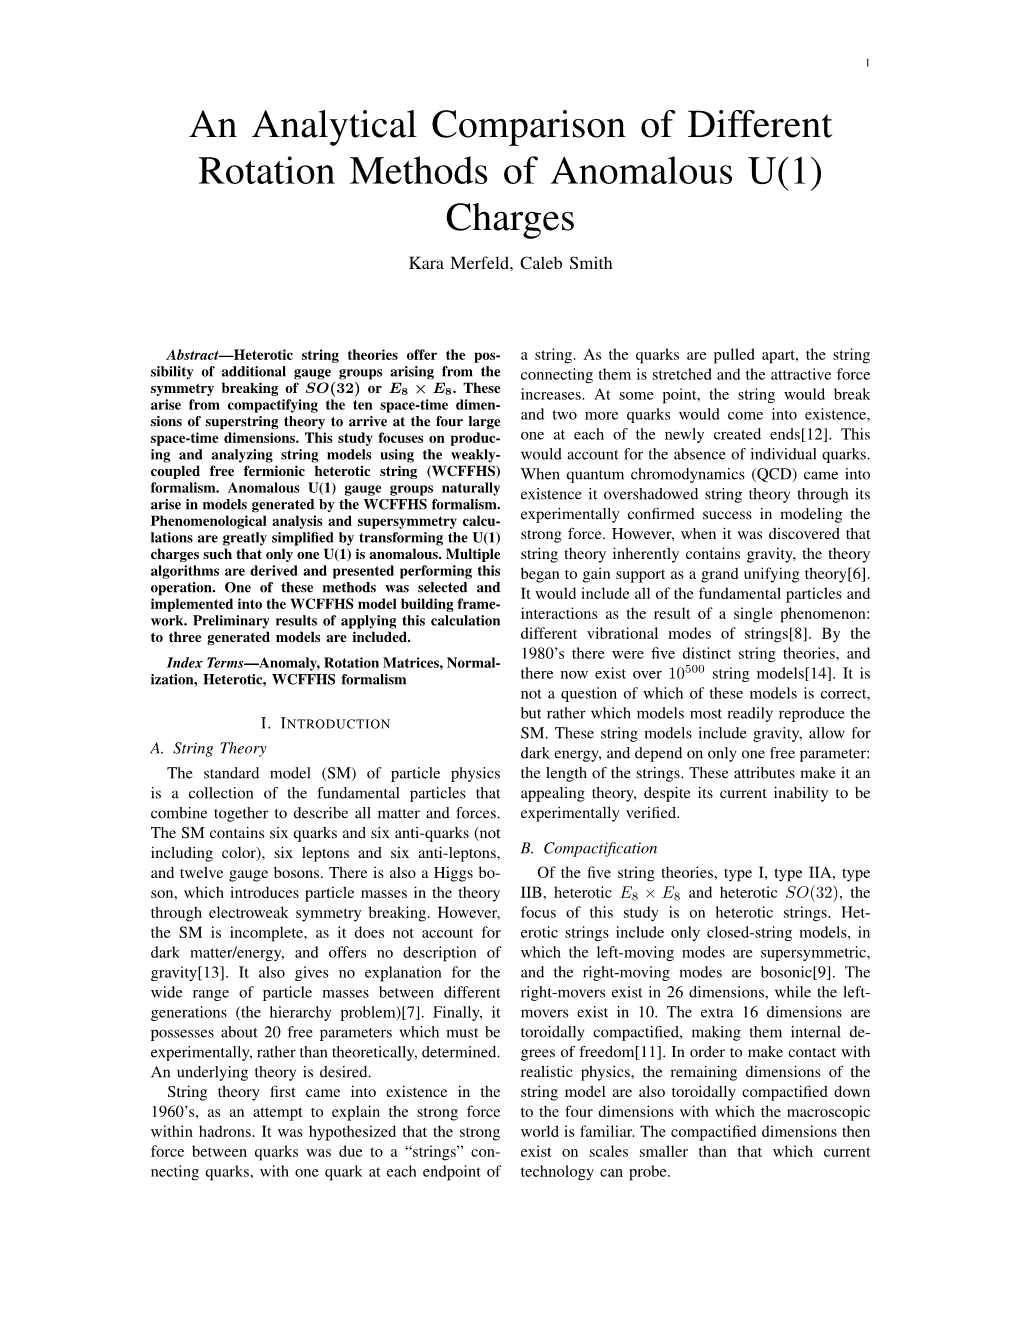 An Analytical Comparison of Different Rotation Methods of Anomalous U(1) Charges Kara Merfeld, Caleb Smith